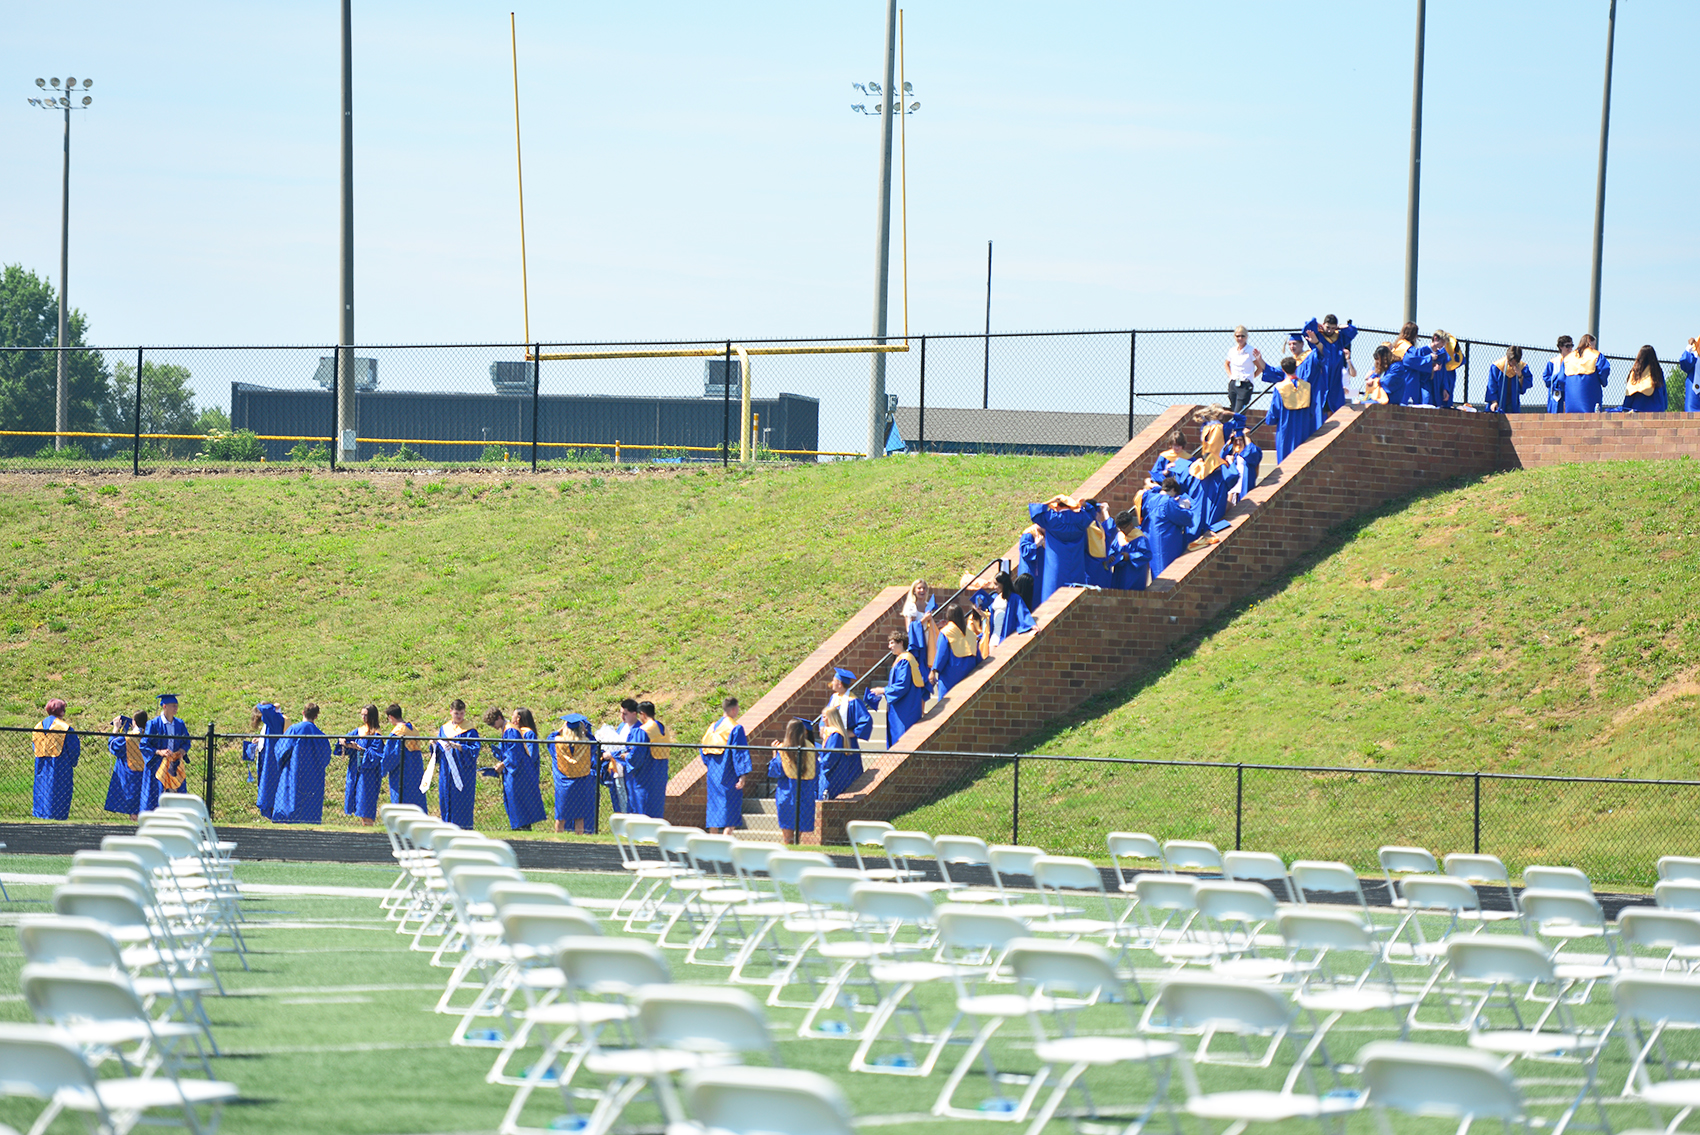 FMHS Graduation in Pictures Twenty Photos Show the Class of 2020